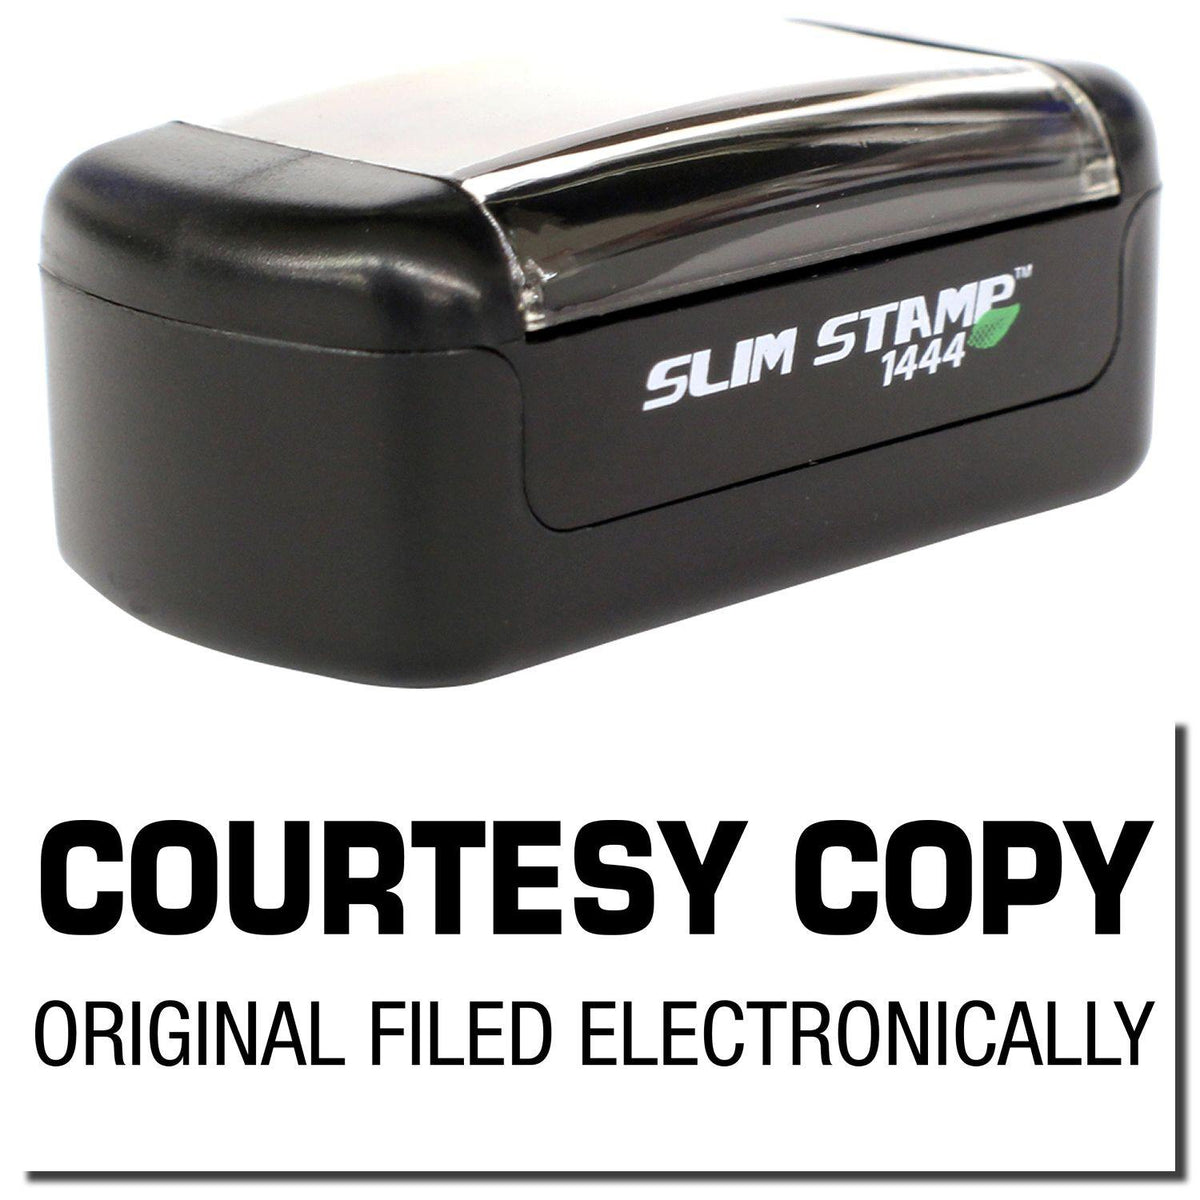 A stock office pre-inked stamp with a stamped image showing how the text &quot;COURTESY COPY ORIGINAL FILED ELECTRONICALLY&quot; is displayed after stamping.